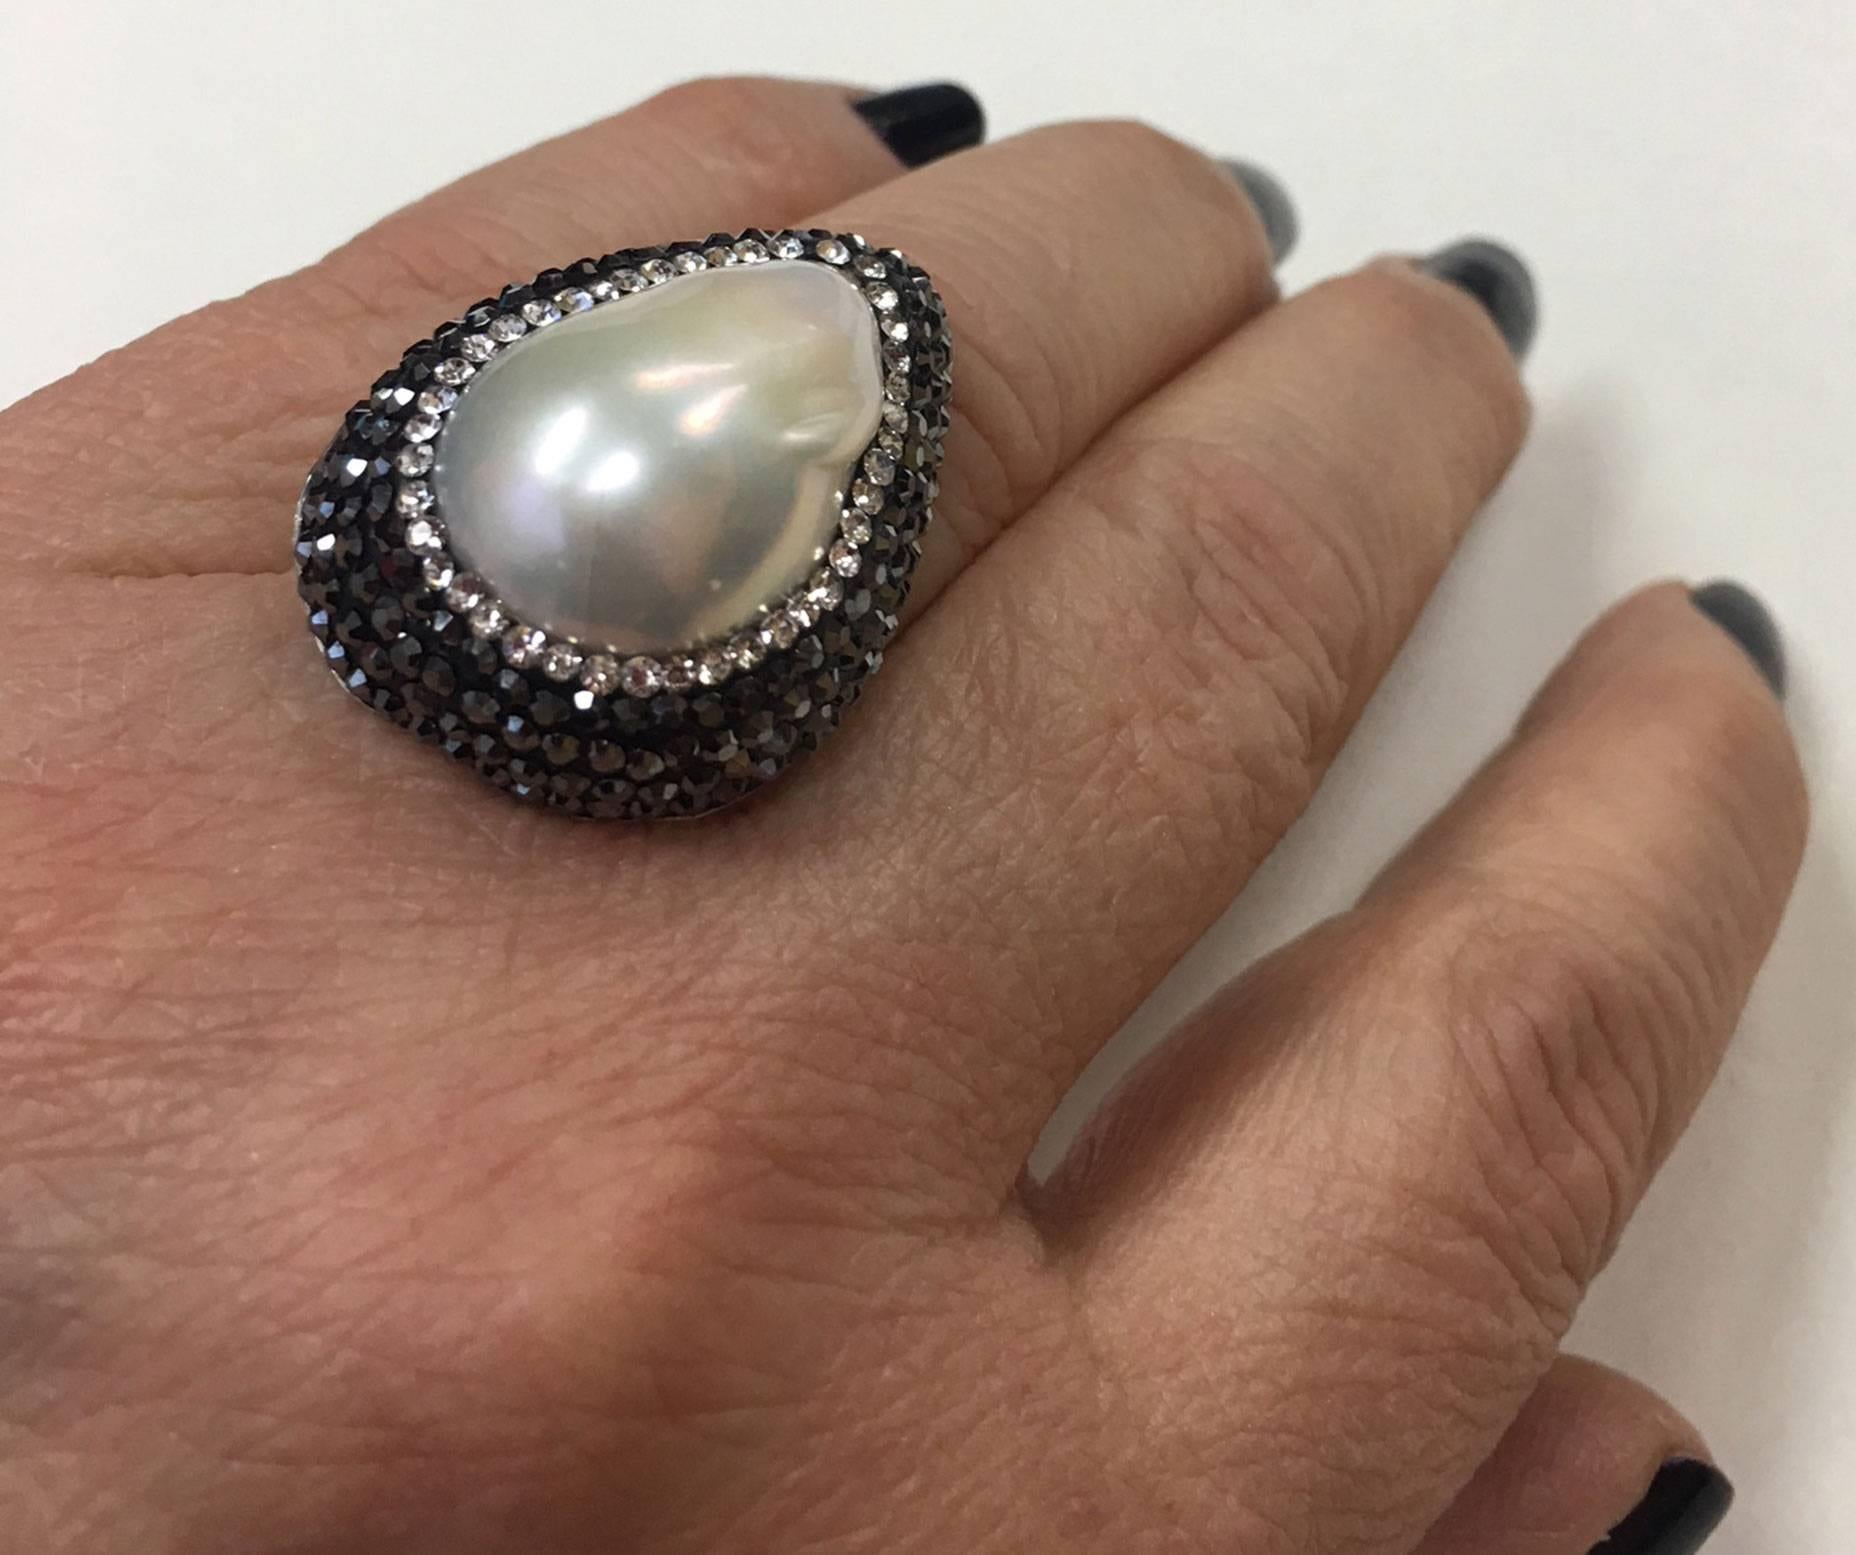 Sparkling pavé-set Faux White and Black Diamonds bring out the breathtaking Beauty of this Teardrop Mobe Pearl Runway Ring. Marked: 925; Size 8; approx. measurement of top 32mm x 23.5mm (at widest point). Chic and Timeless...Illuminating your Look